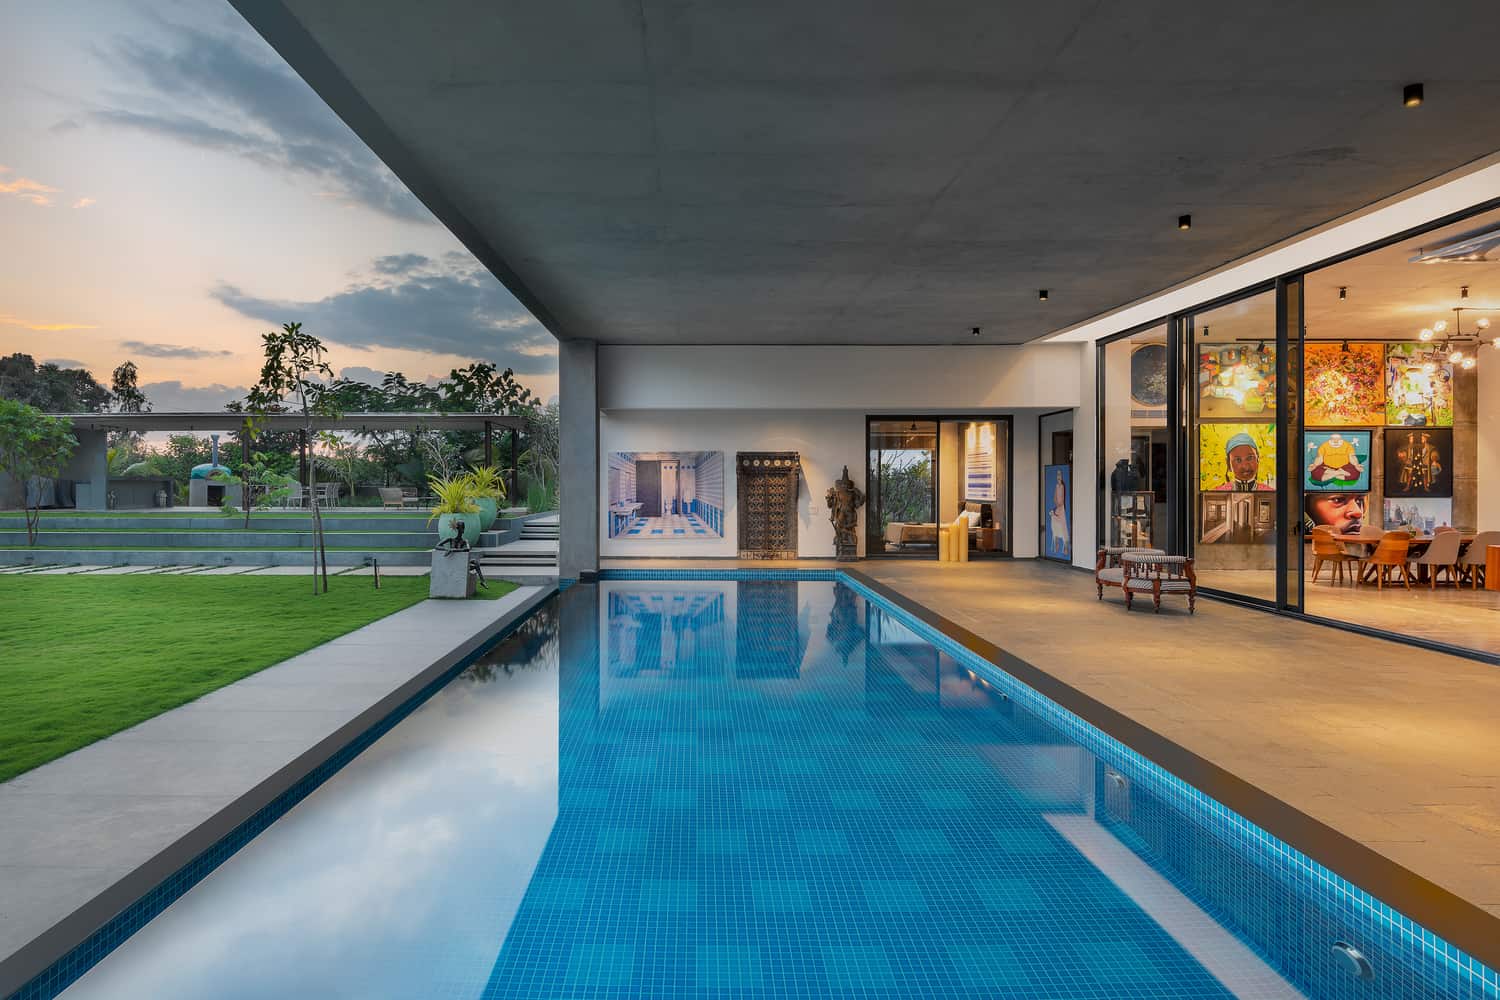 modern luxury home designed by Keystone architects in bangalore, home interior design with an open plan living room leading to an expansive swimming pool and outdoor garden